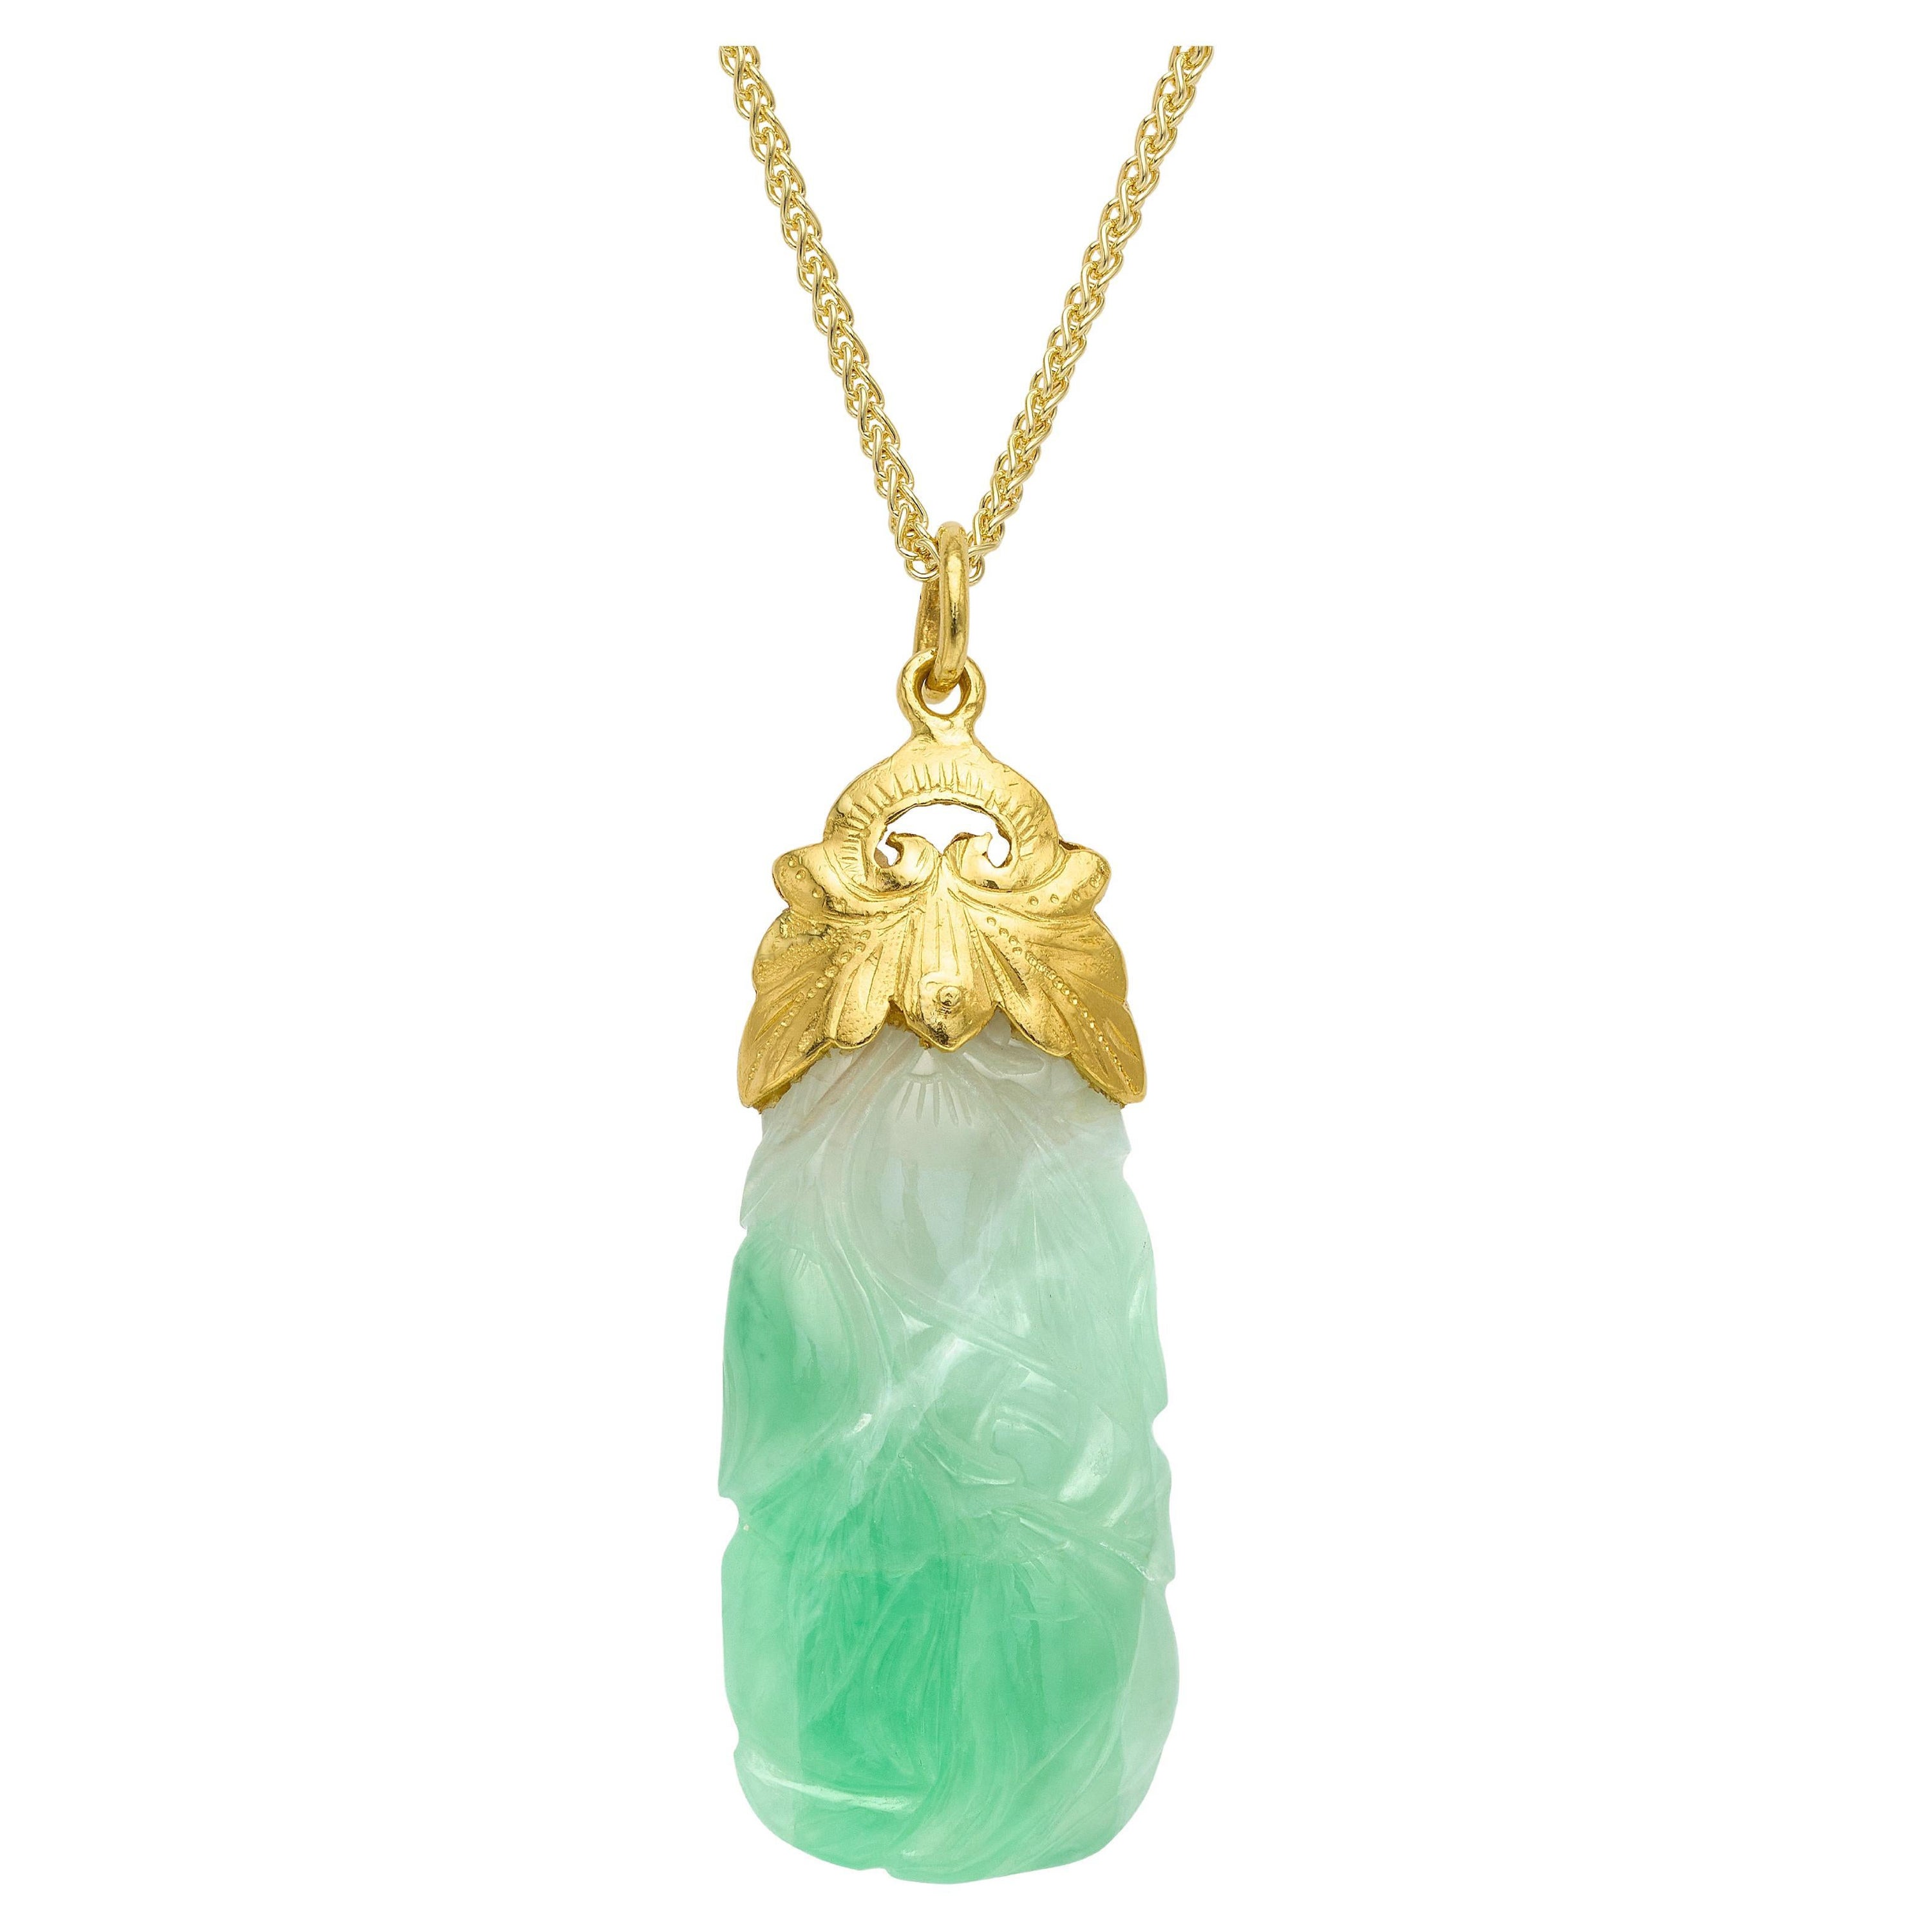 1970s 24k Yellow Gold Carved Jadeite Pendant For Sale